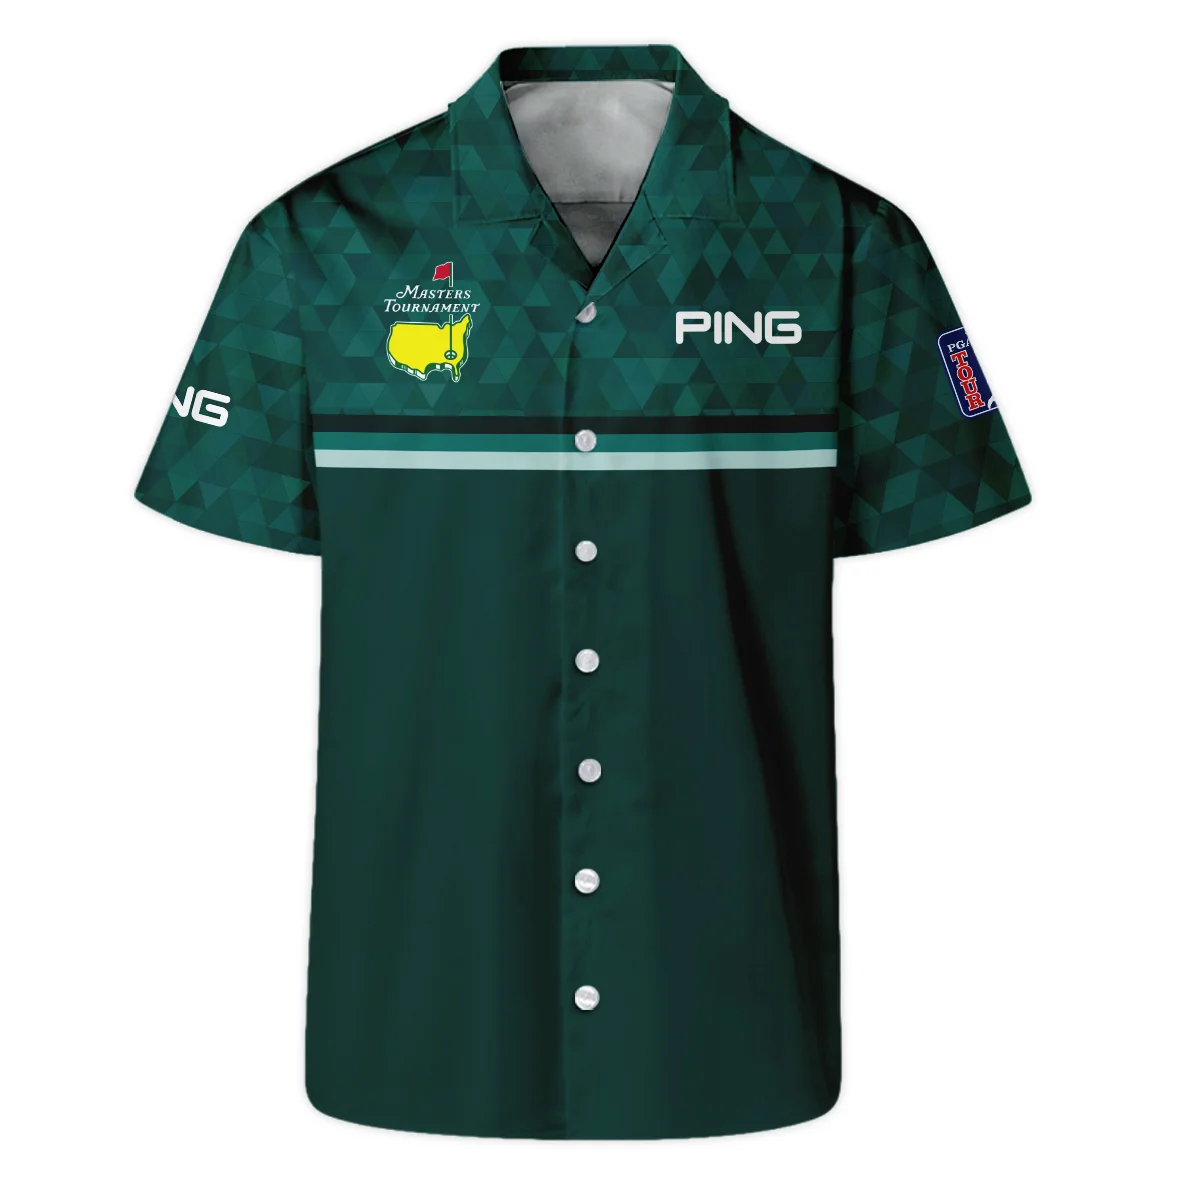 Dark Green Triangle Mosaic Pattern Masters Tournament Ping Polo Shirt Style Classic Polo Shirt For Men